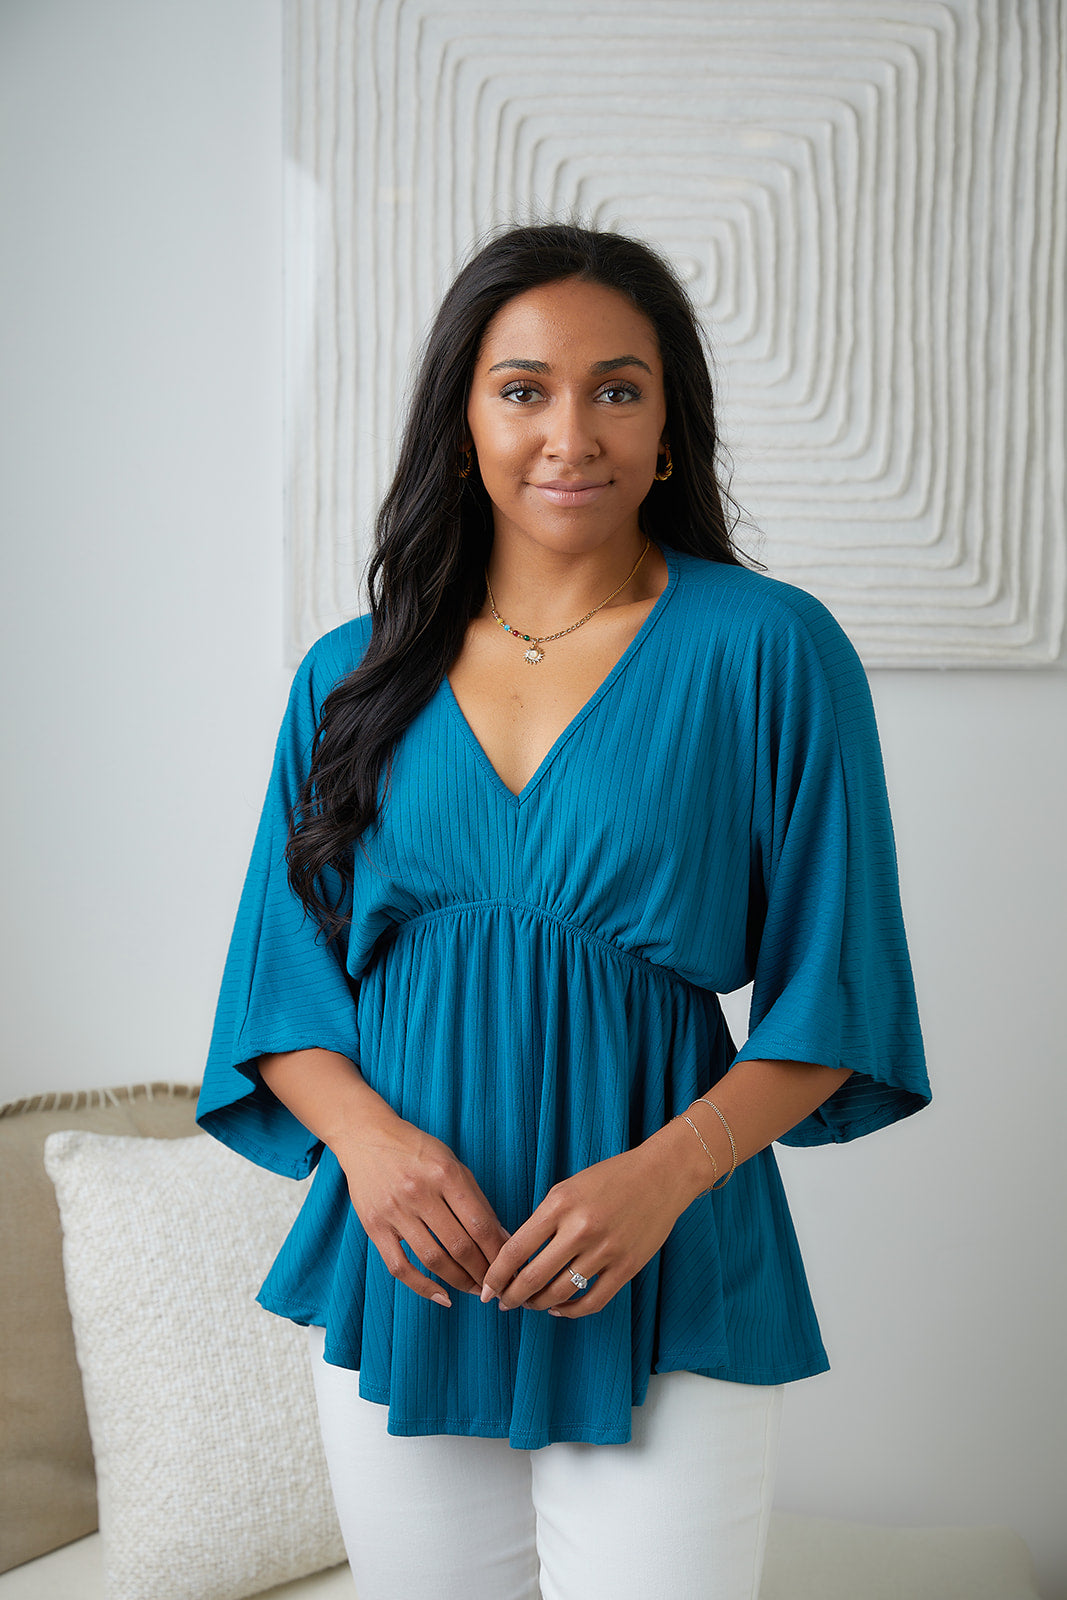 Brand Collab Storied Moments Draped Peplum Top in Teal